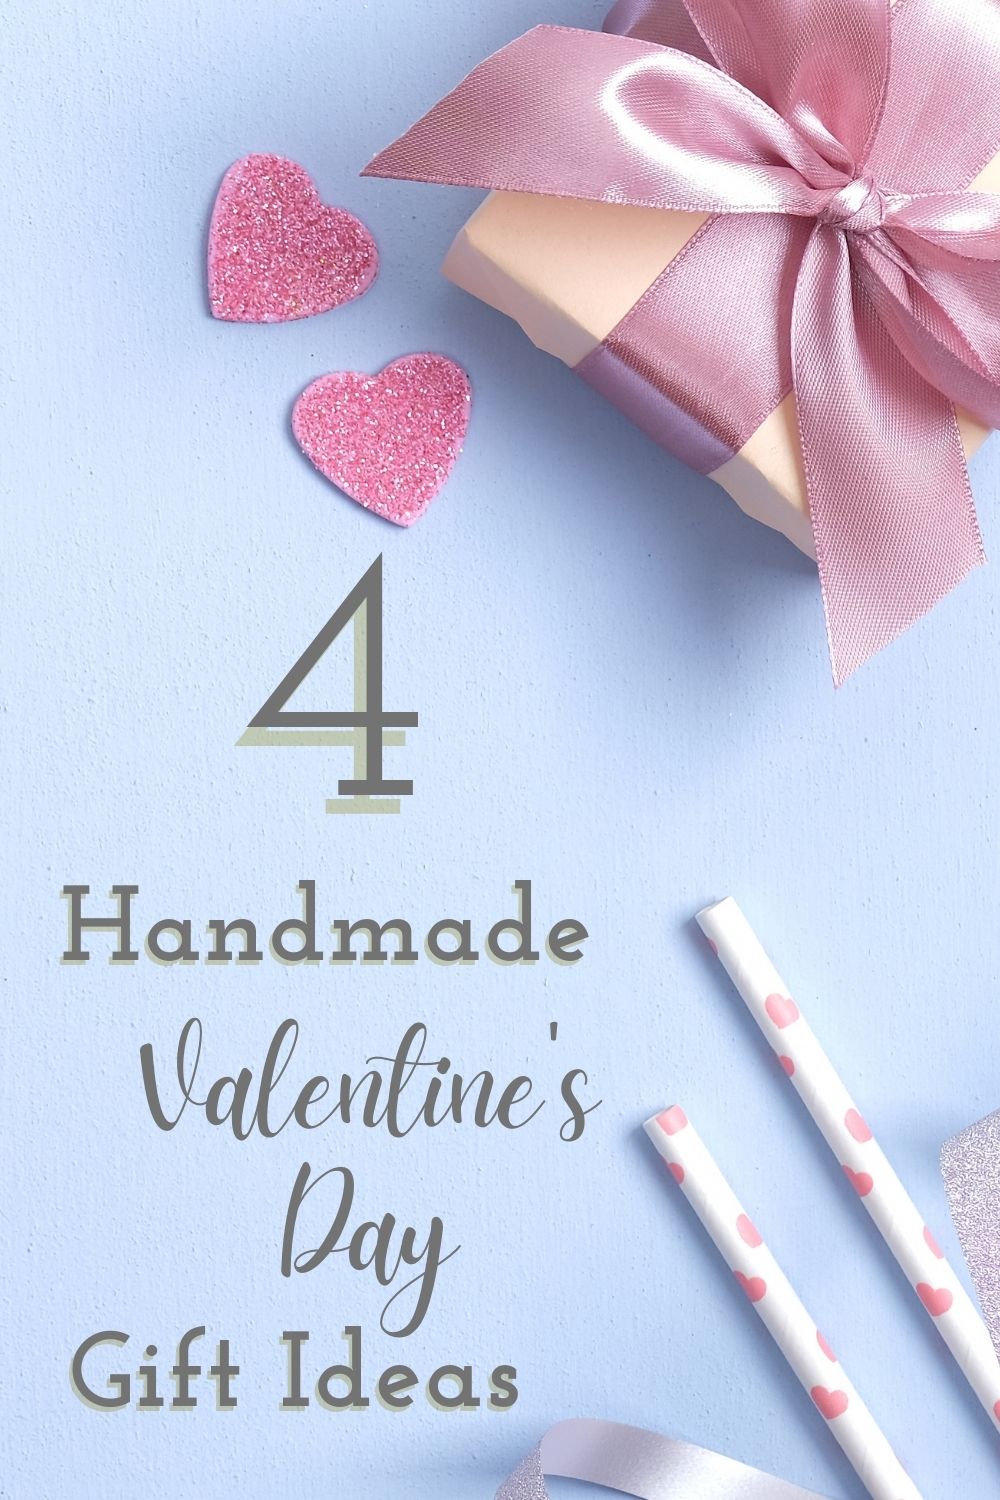 Best Handmade Gifts For Valentine’s Day